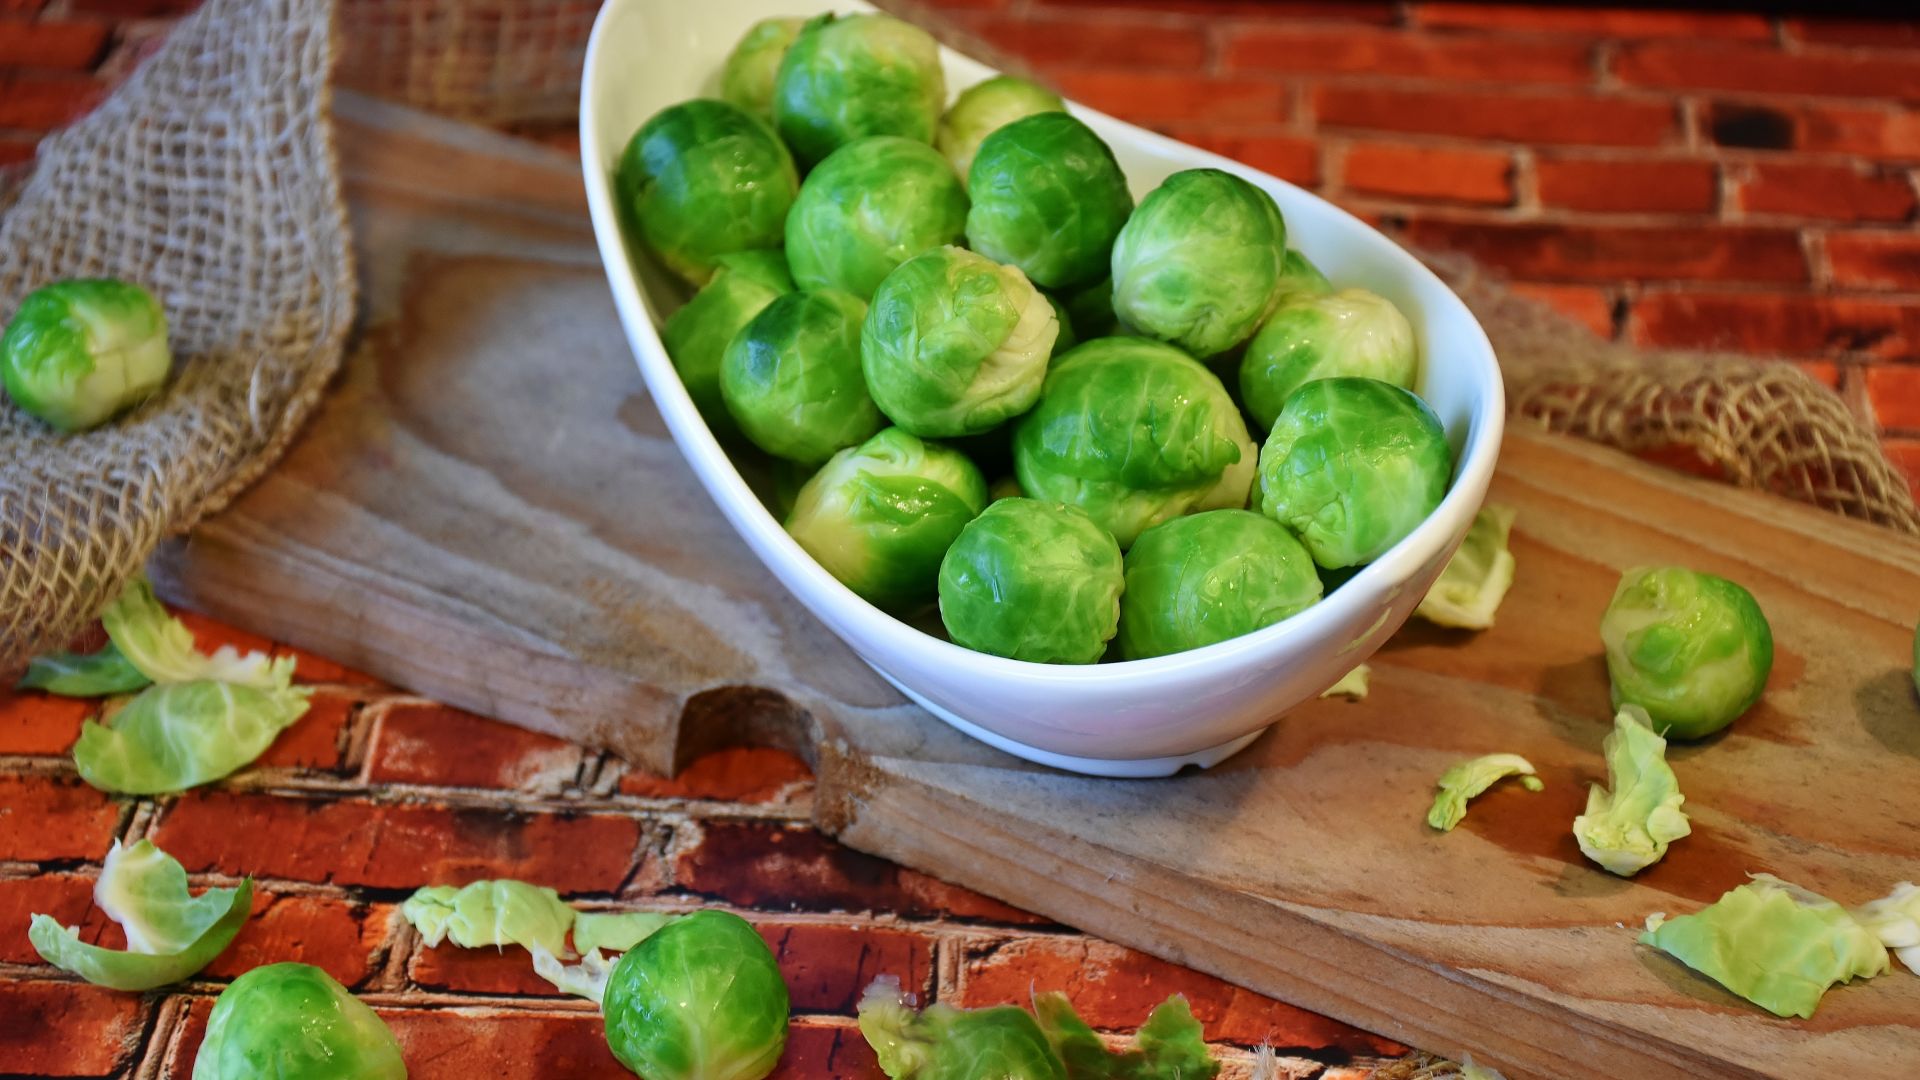 Wallpaper Brussels sprouts vegetable dish wallpaper